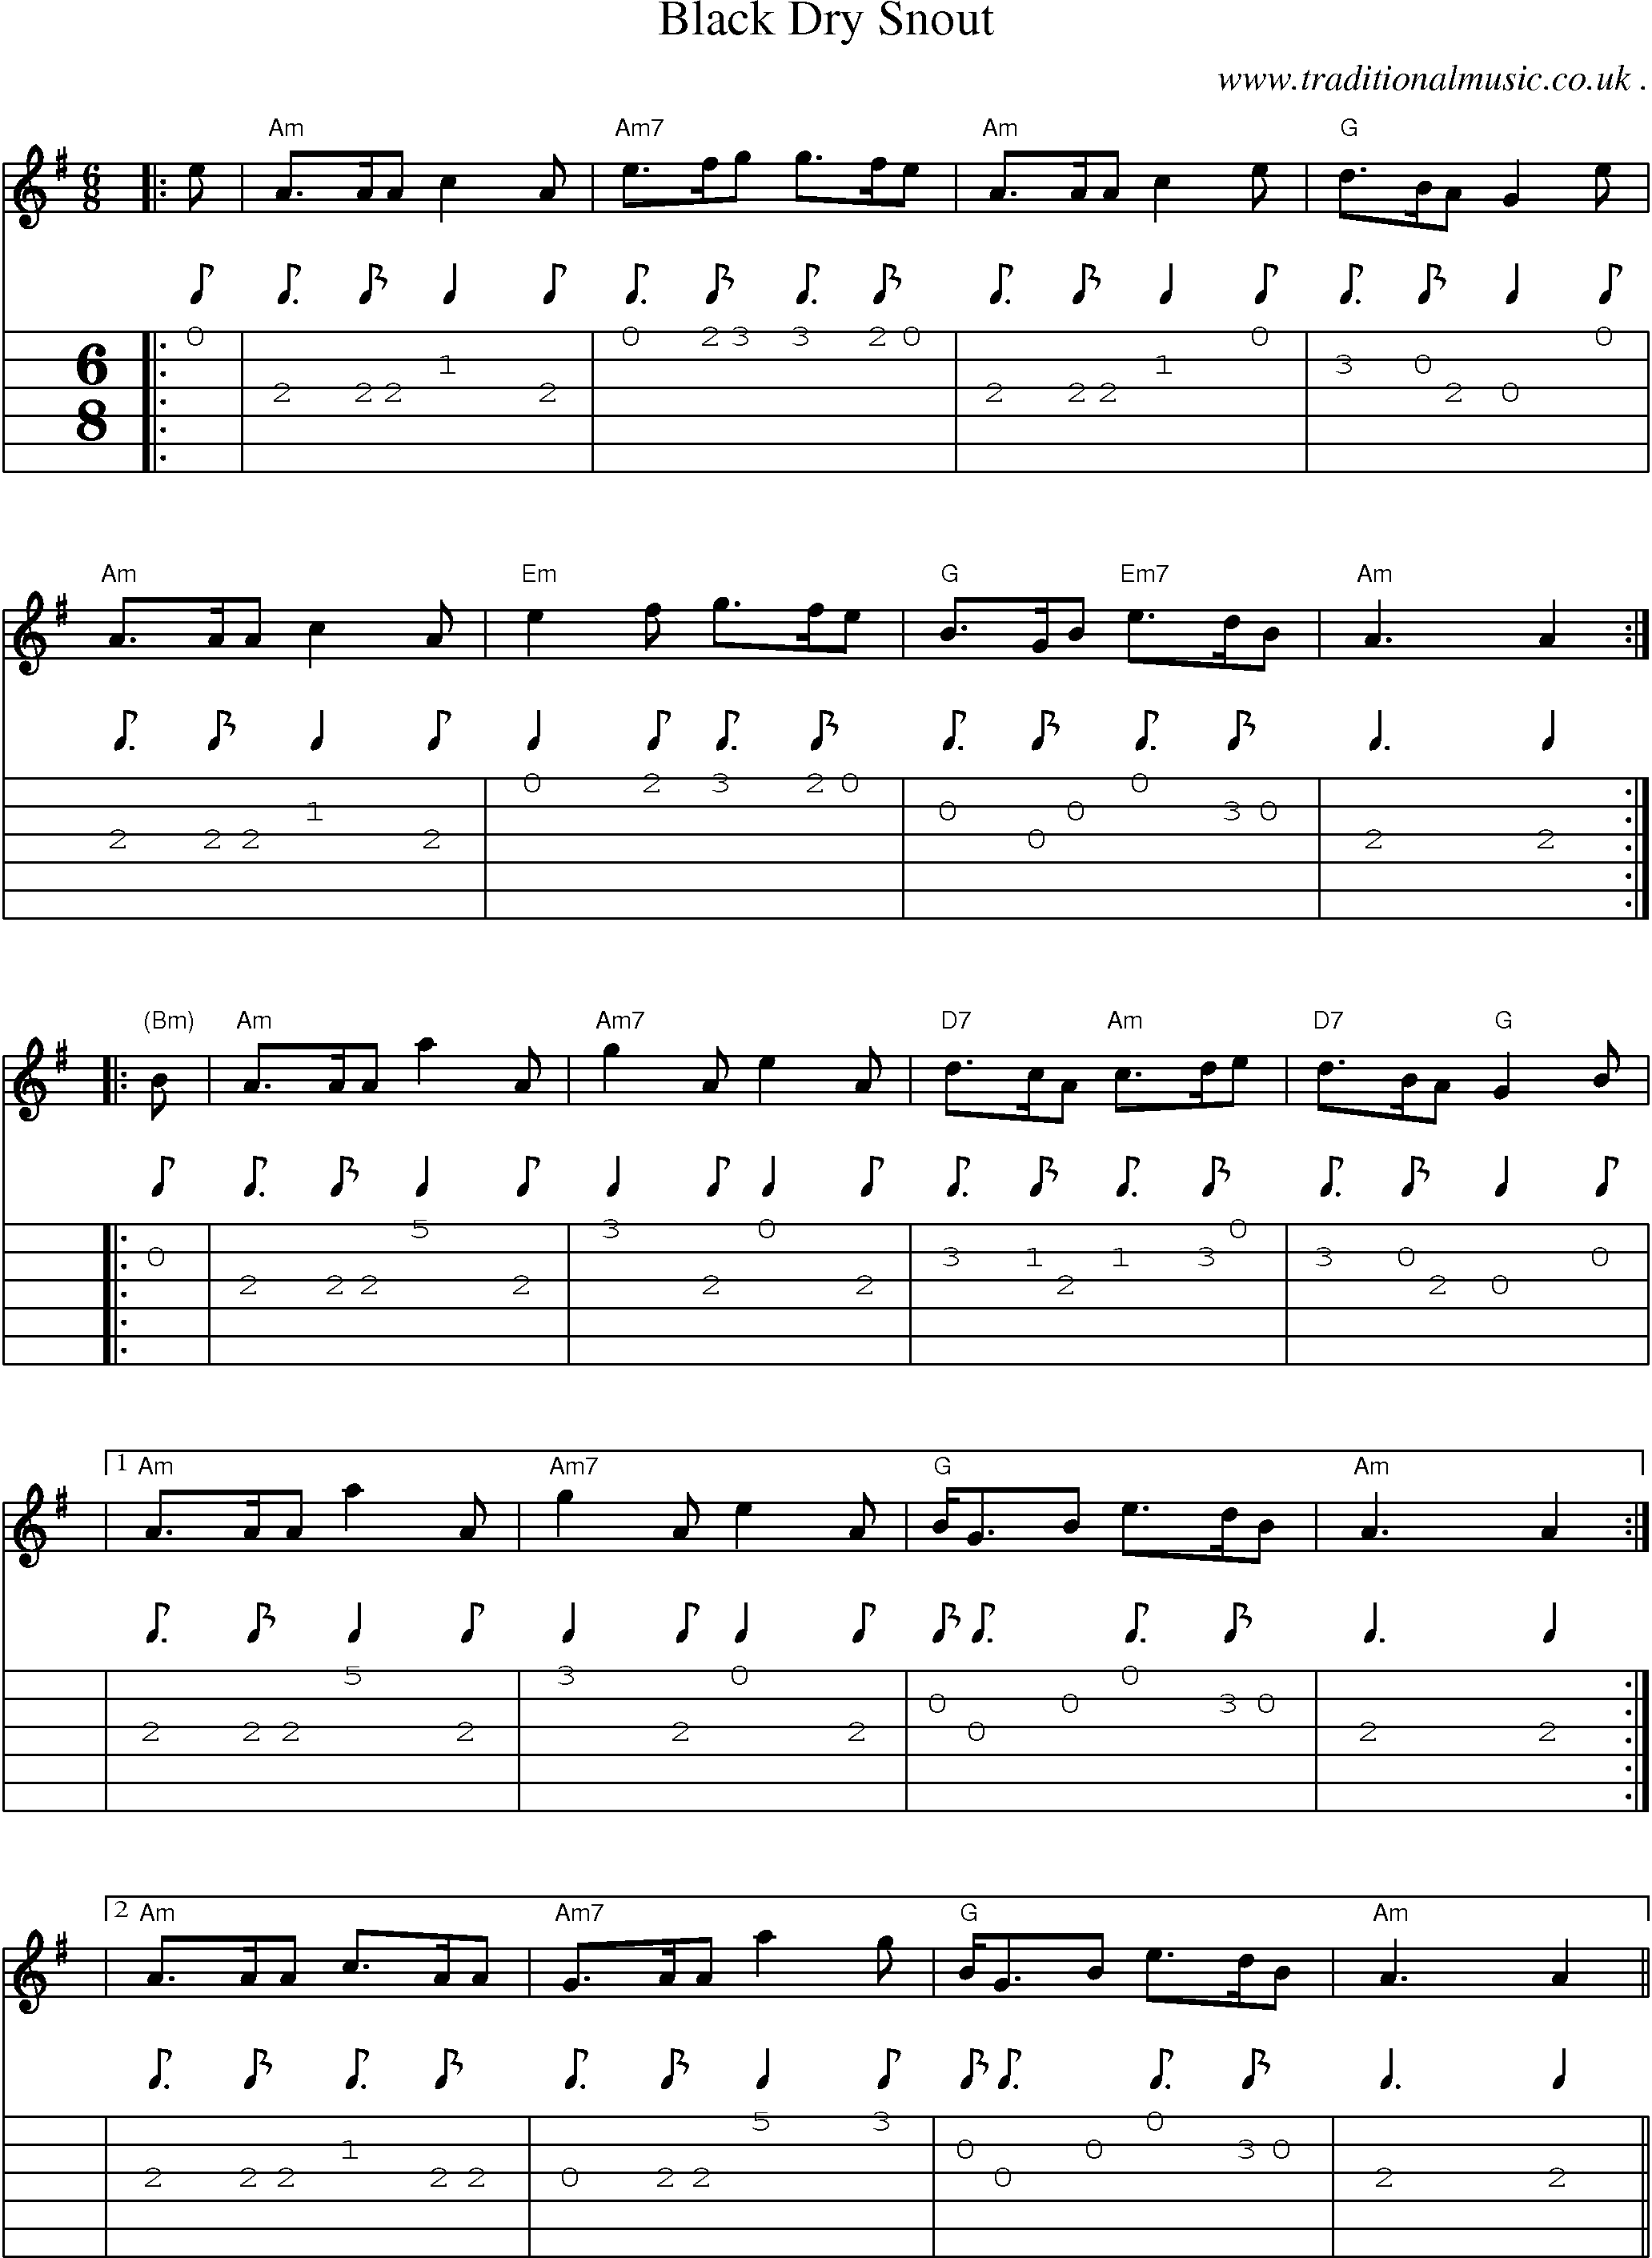 Music Score and Guitar Tabs for Black Dry Snout